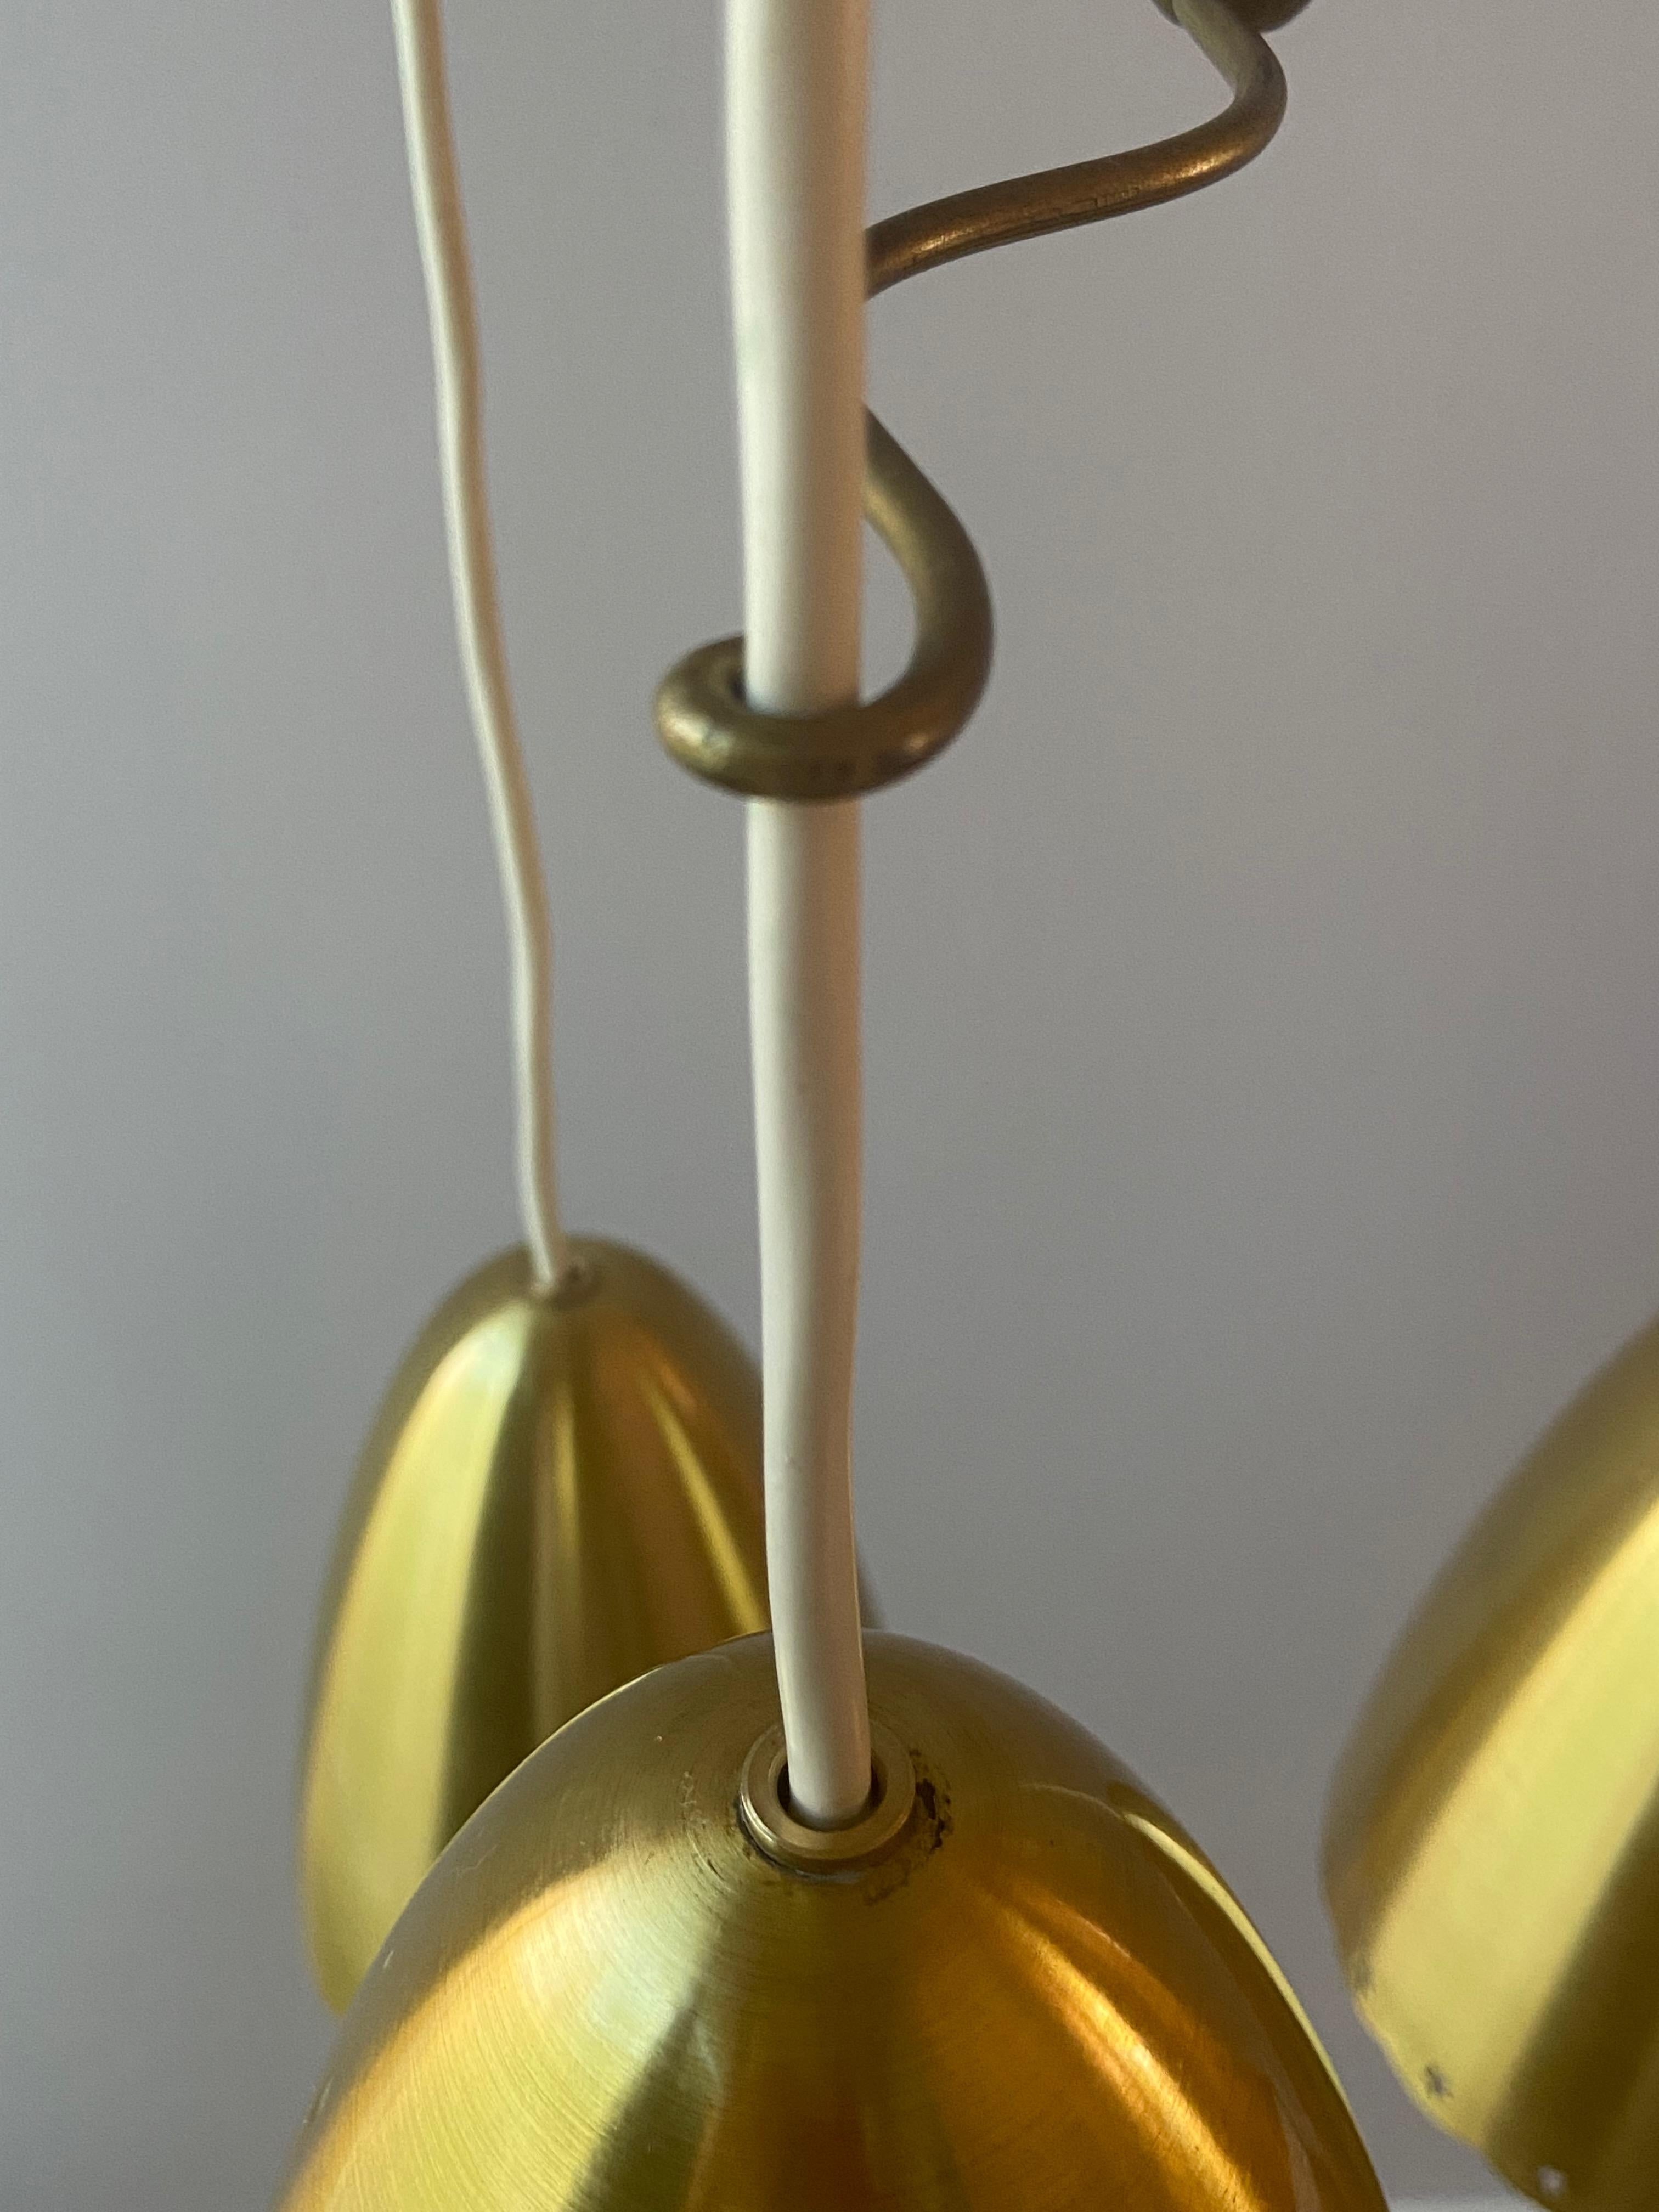 Very nice Set of 3 brass pendant lamps/shades) from the 1960. Beautiful condition with nice Patina.

The lamp comes with an E26/27 Edision screw socket, canopy and holder for the ceiling hook the lamp is ready to use worldwide.

